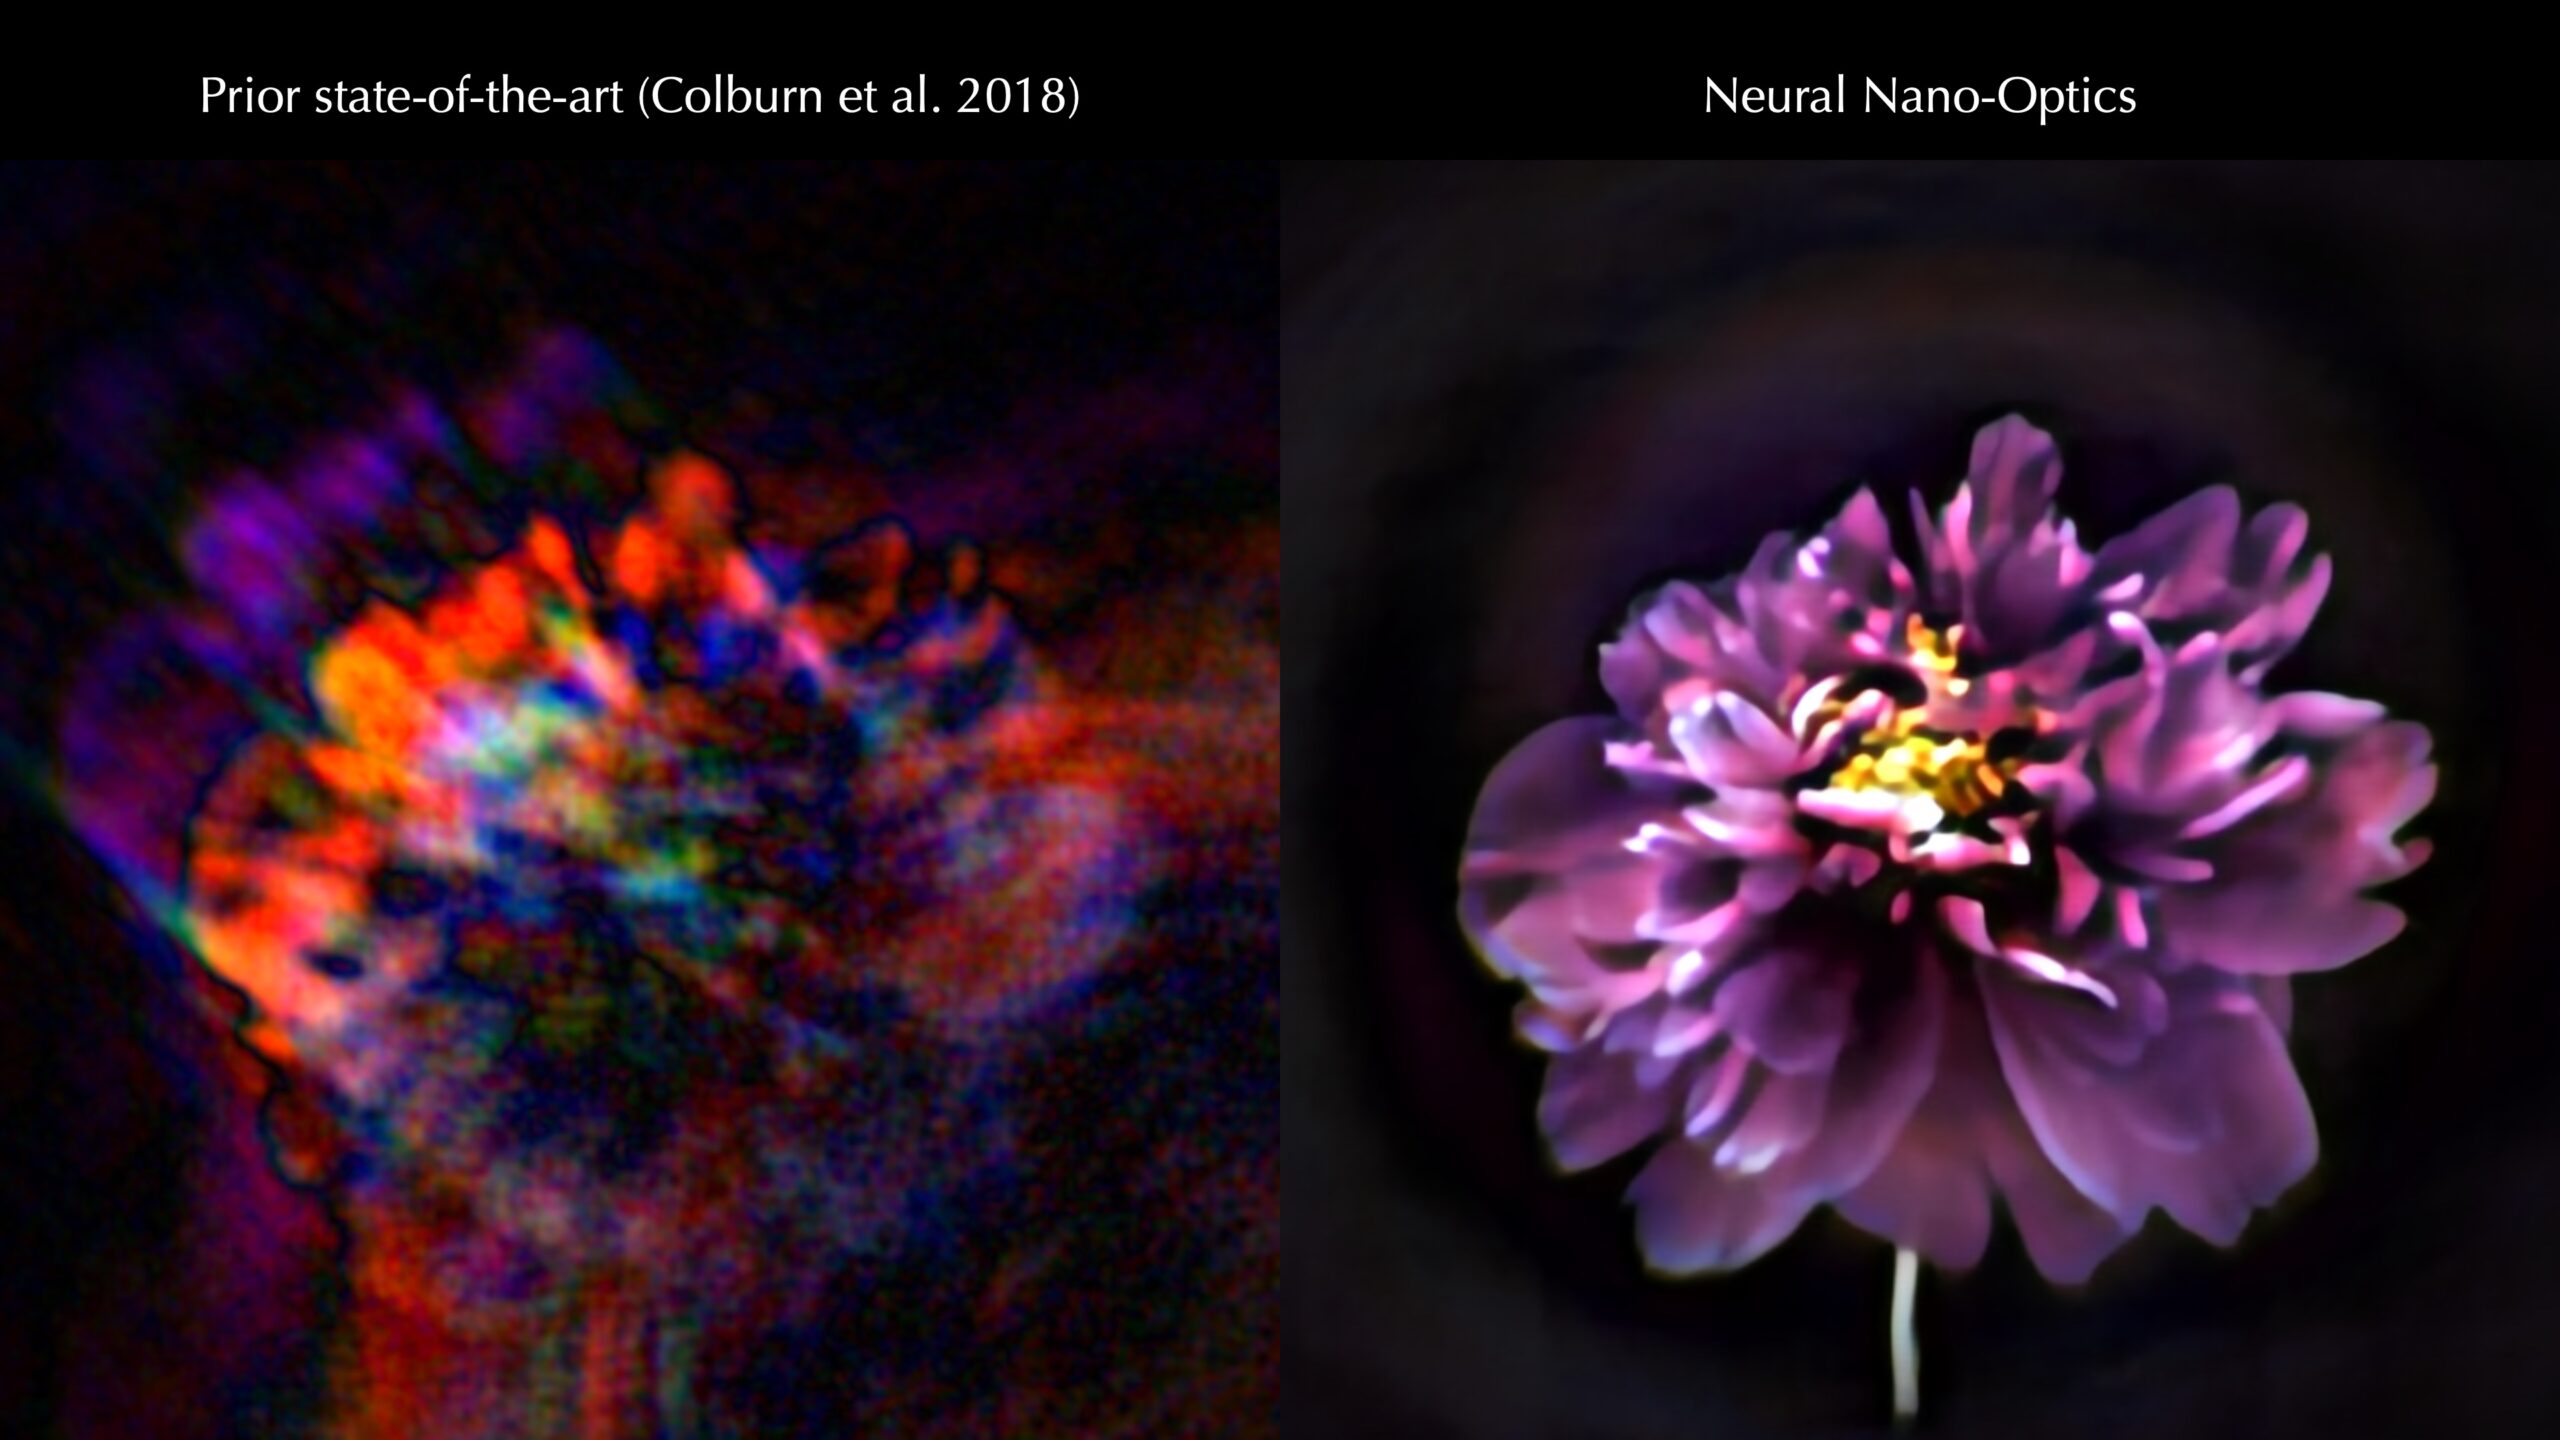 a blurry image of a flower taken by a previous mini camera is contrasted with the clear image of the flower taken by the new camera